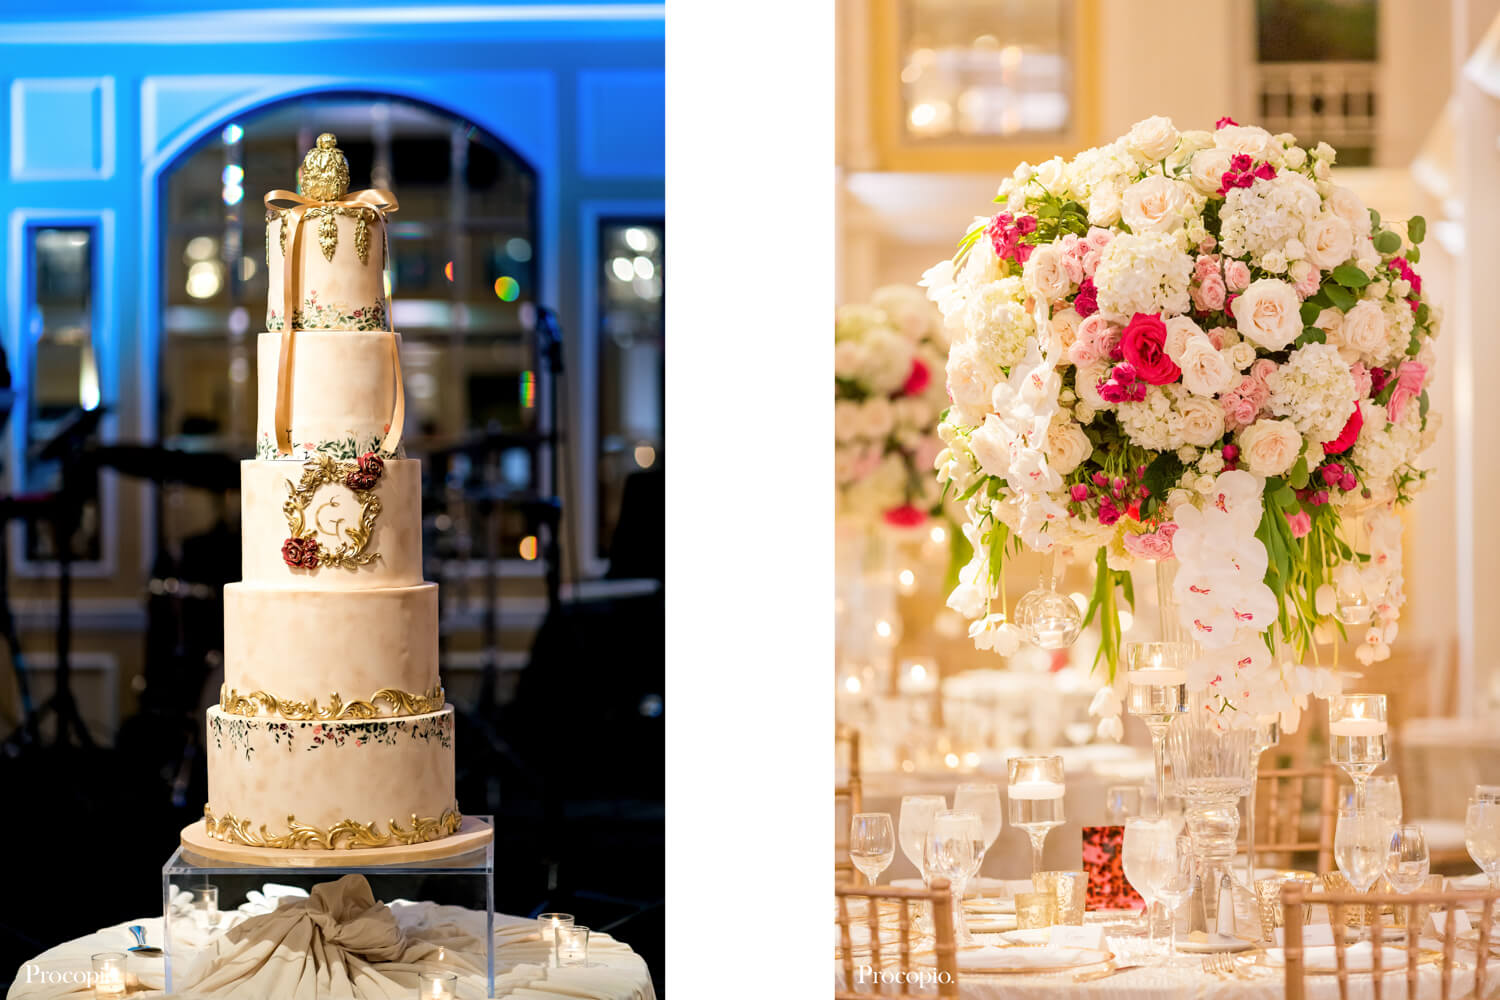 5 tier wedding cake and white rose centerpiece  - Perfect Planning Events - best Washington DC wedding planner - photo by Procopio Photography